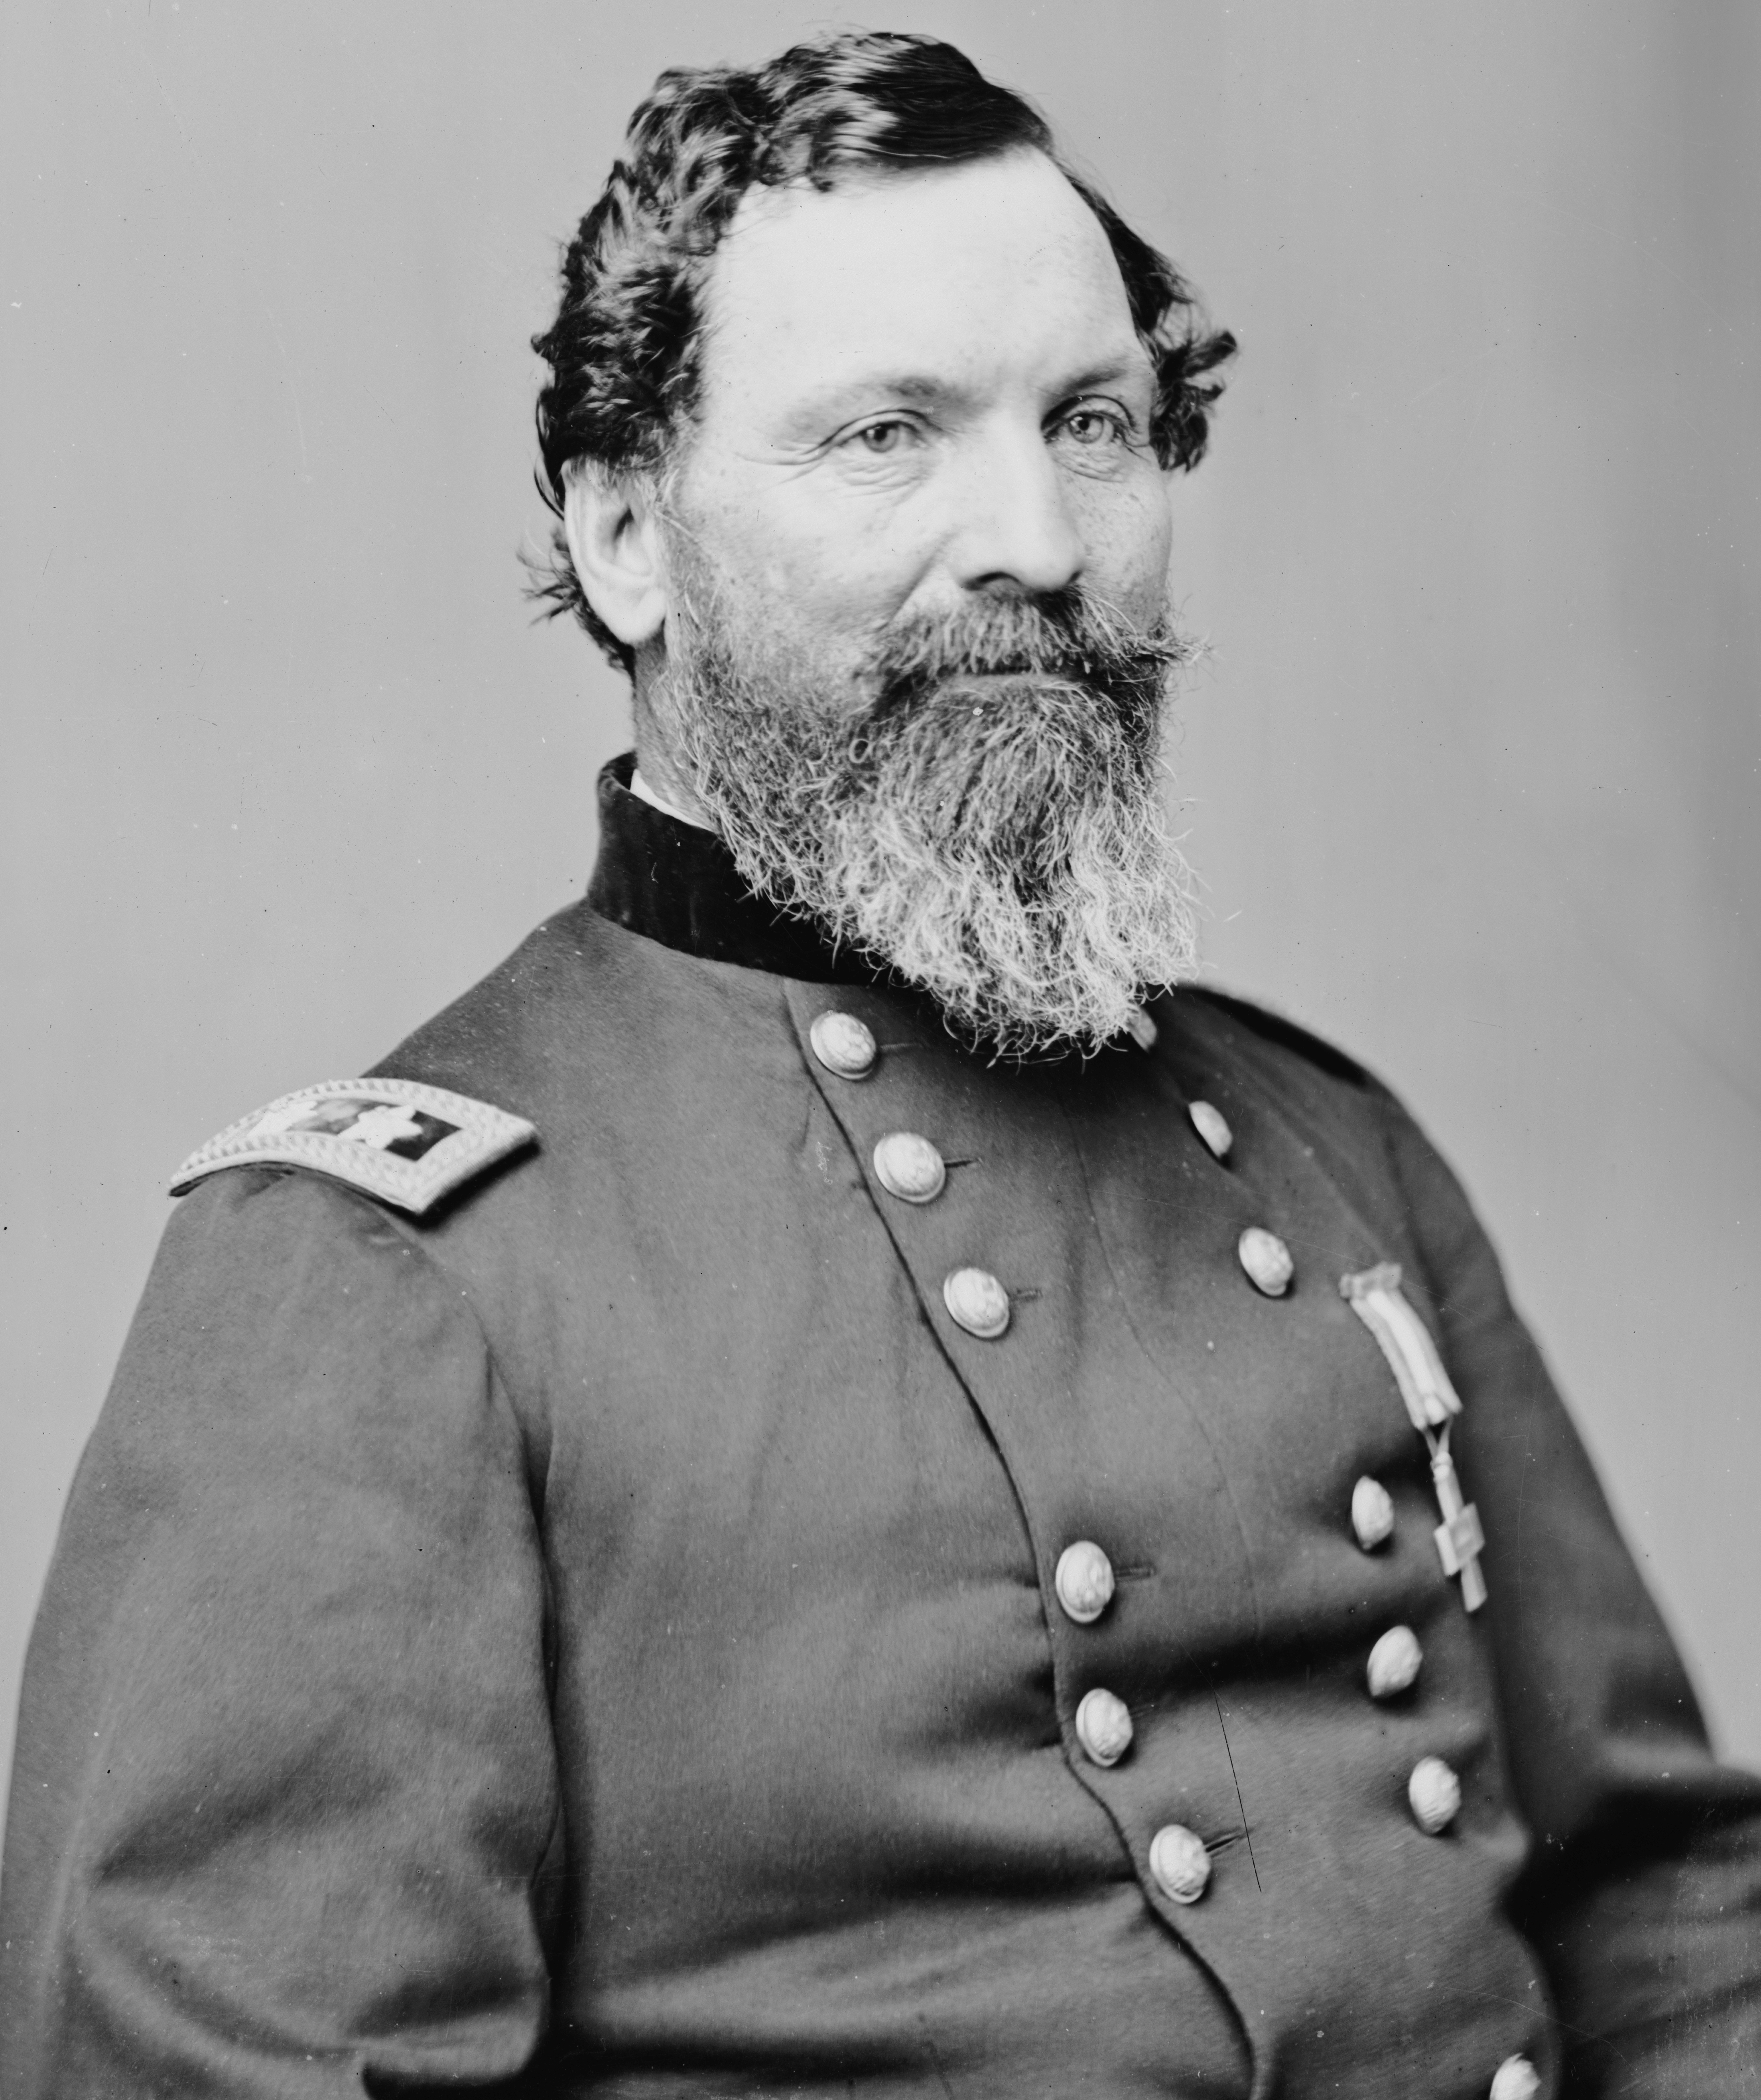 Sedgwick in the 1860s